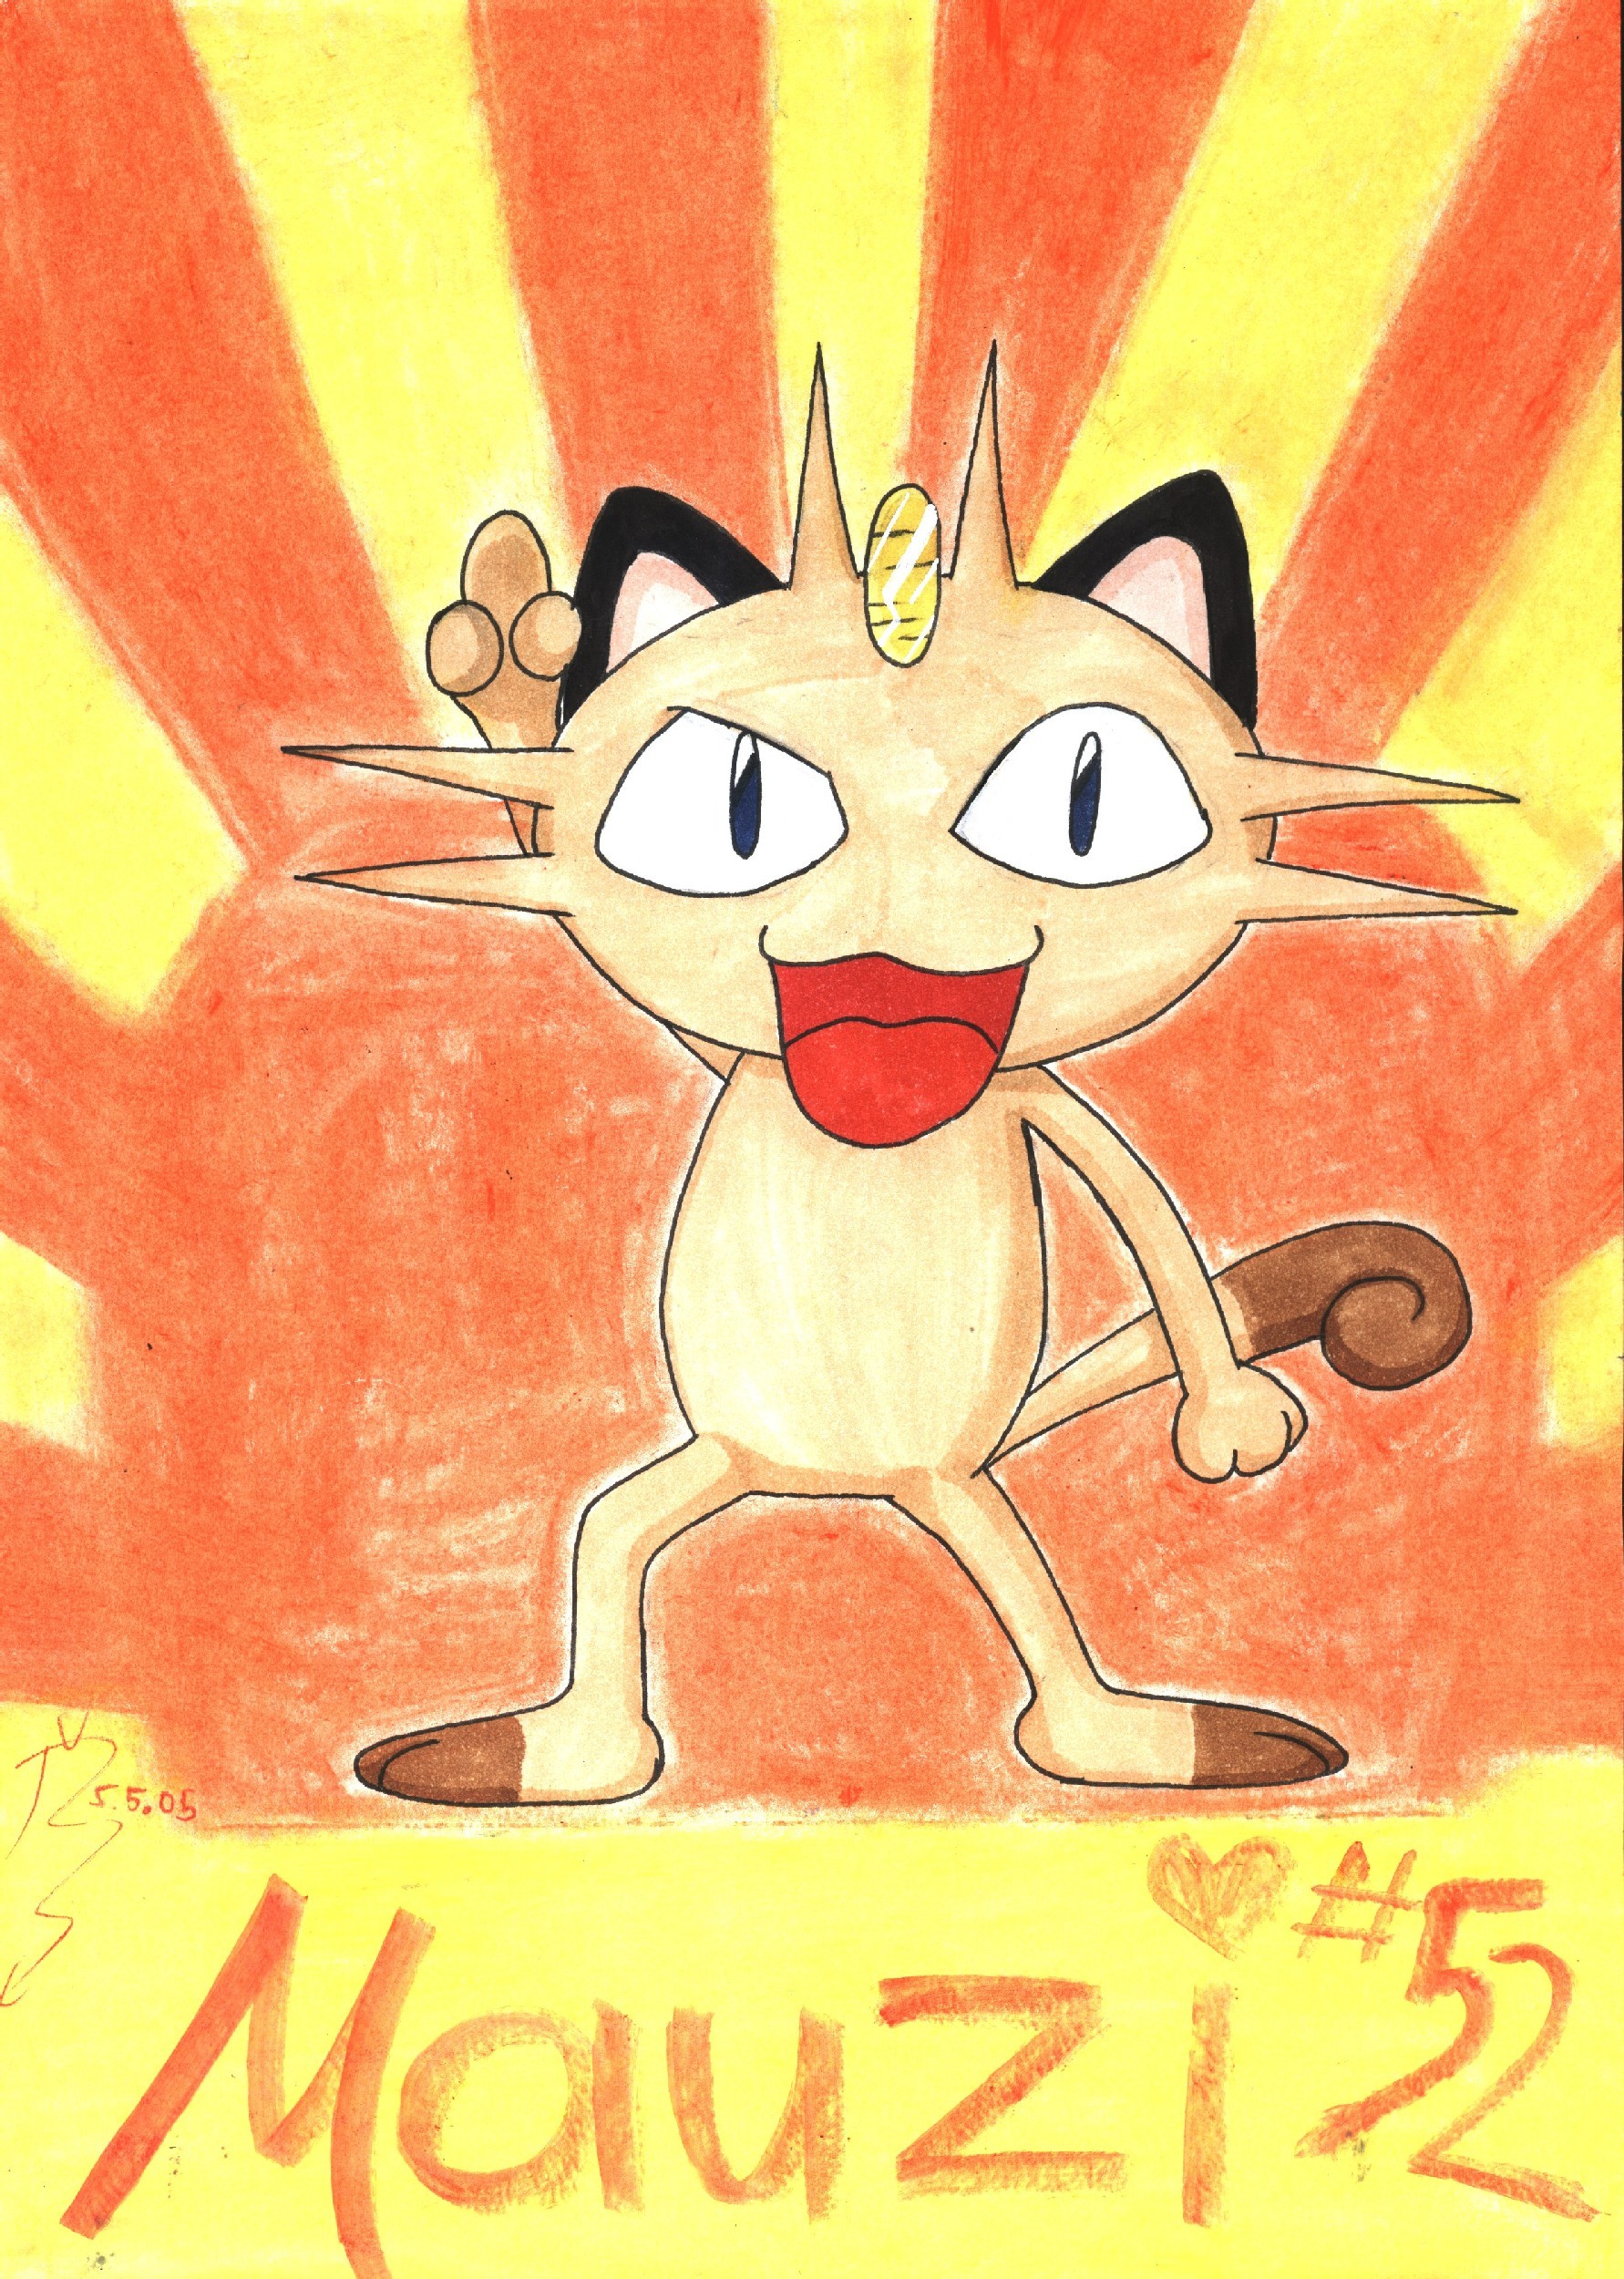 Meowth is the Best! XD by Kojiro